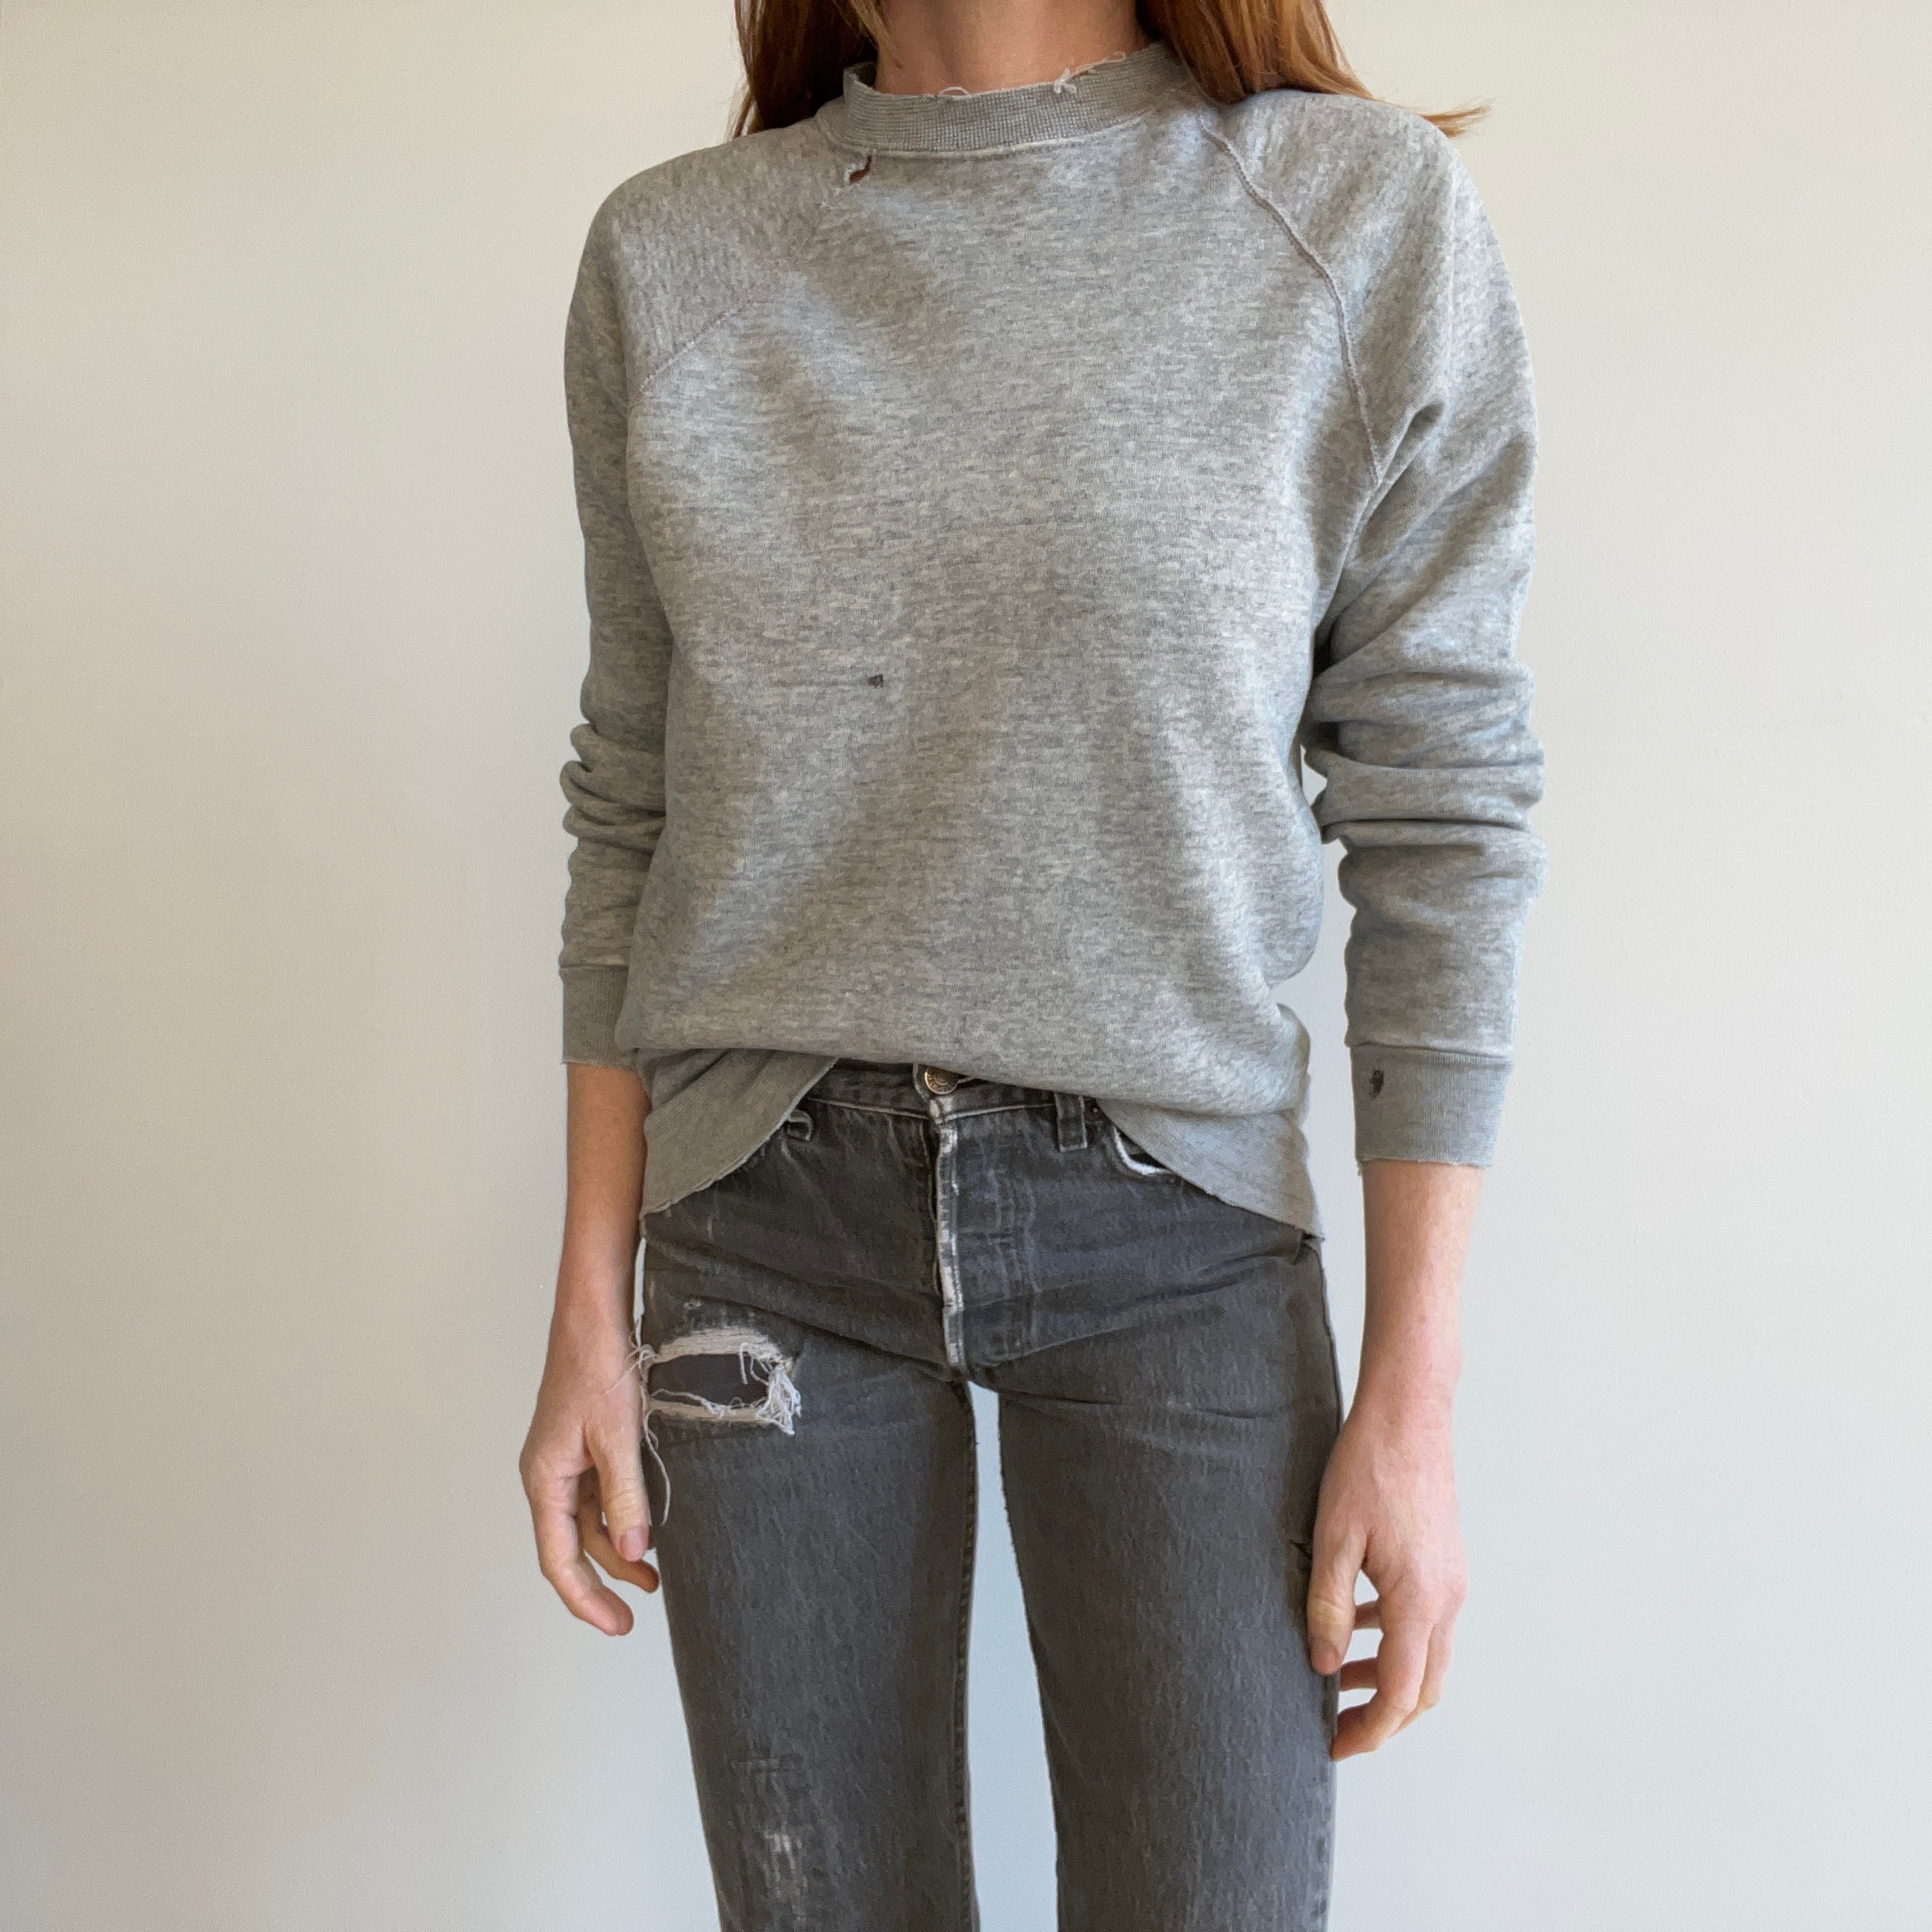 1980s Perfectly Tattered Split Collared Blank Gray Stained Sweatshirt